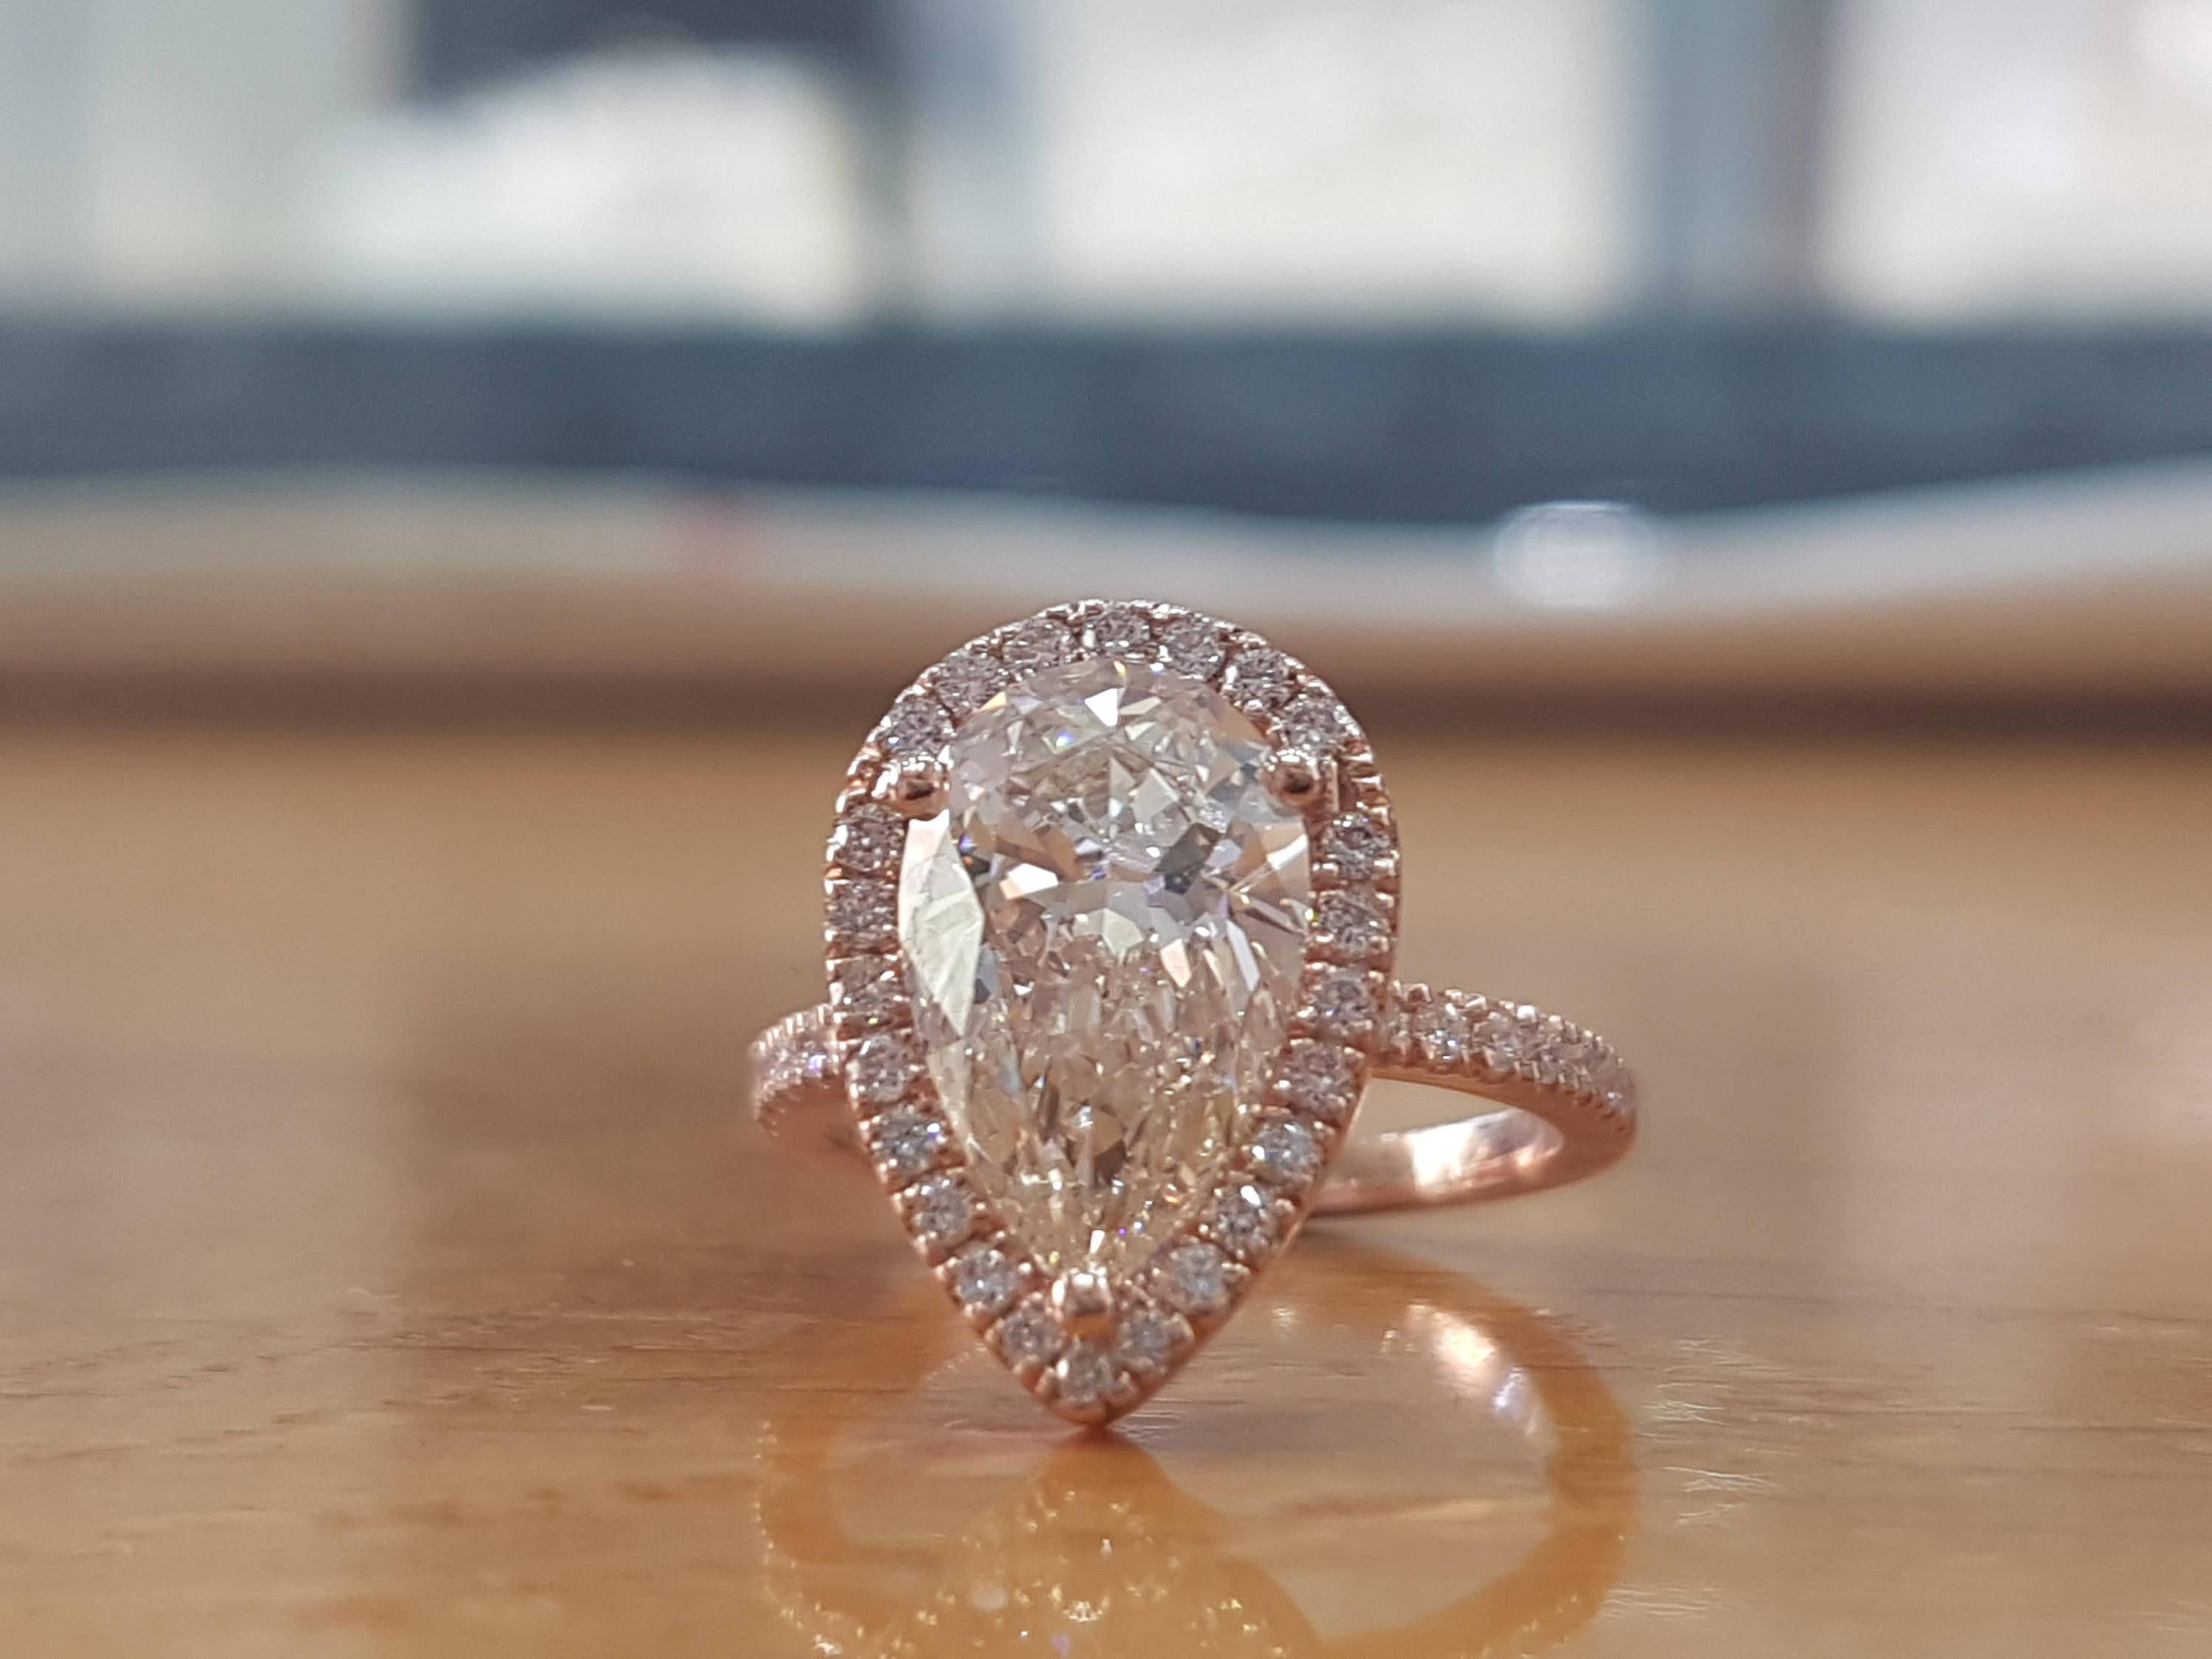 1 1/2 Carat Pear Engagement Ring, Diamond Engagement Ring, Tear Drop Engagement Ring, Diamond Ring , Rose Gold Engagement Ring, Promise Ring
 
 Main Stone Name: Natural Diamond
 Main Stone Weight: 1.0 ct.
 Main Stone Clarity: SI1
 Main Stone Color: